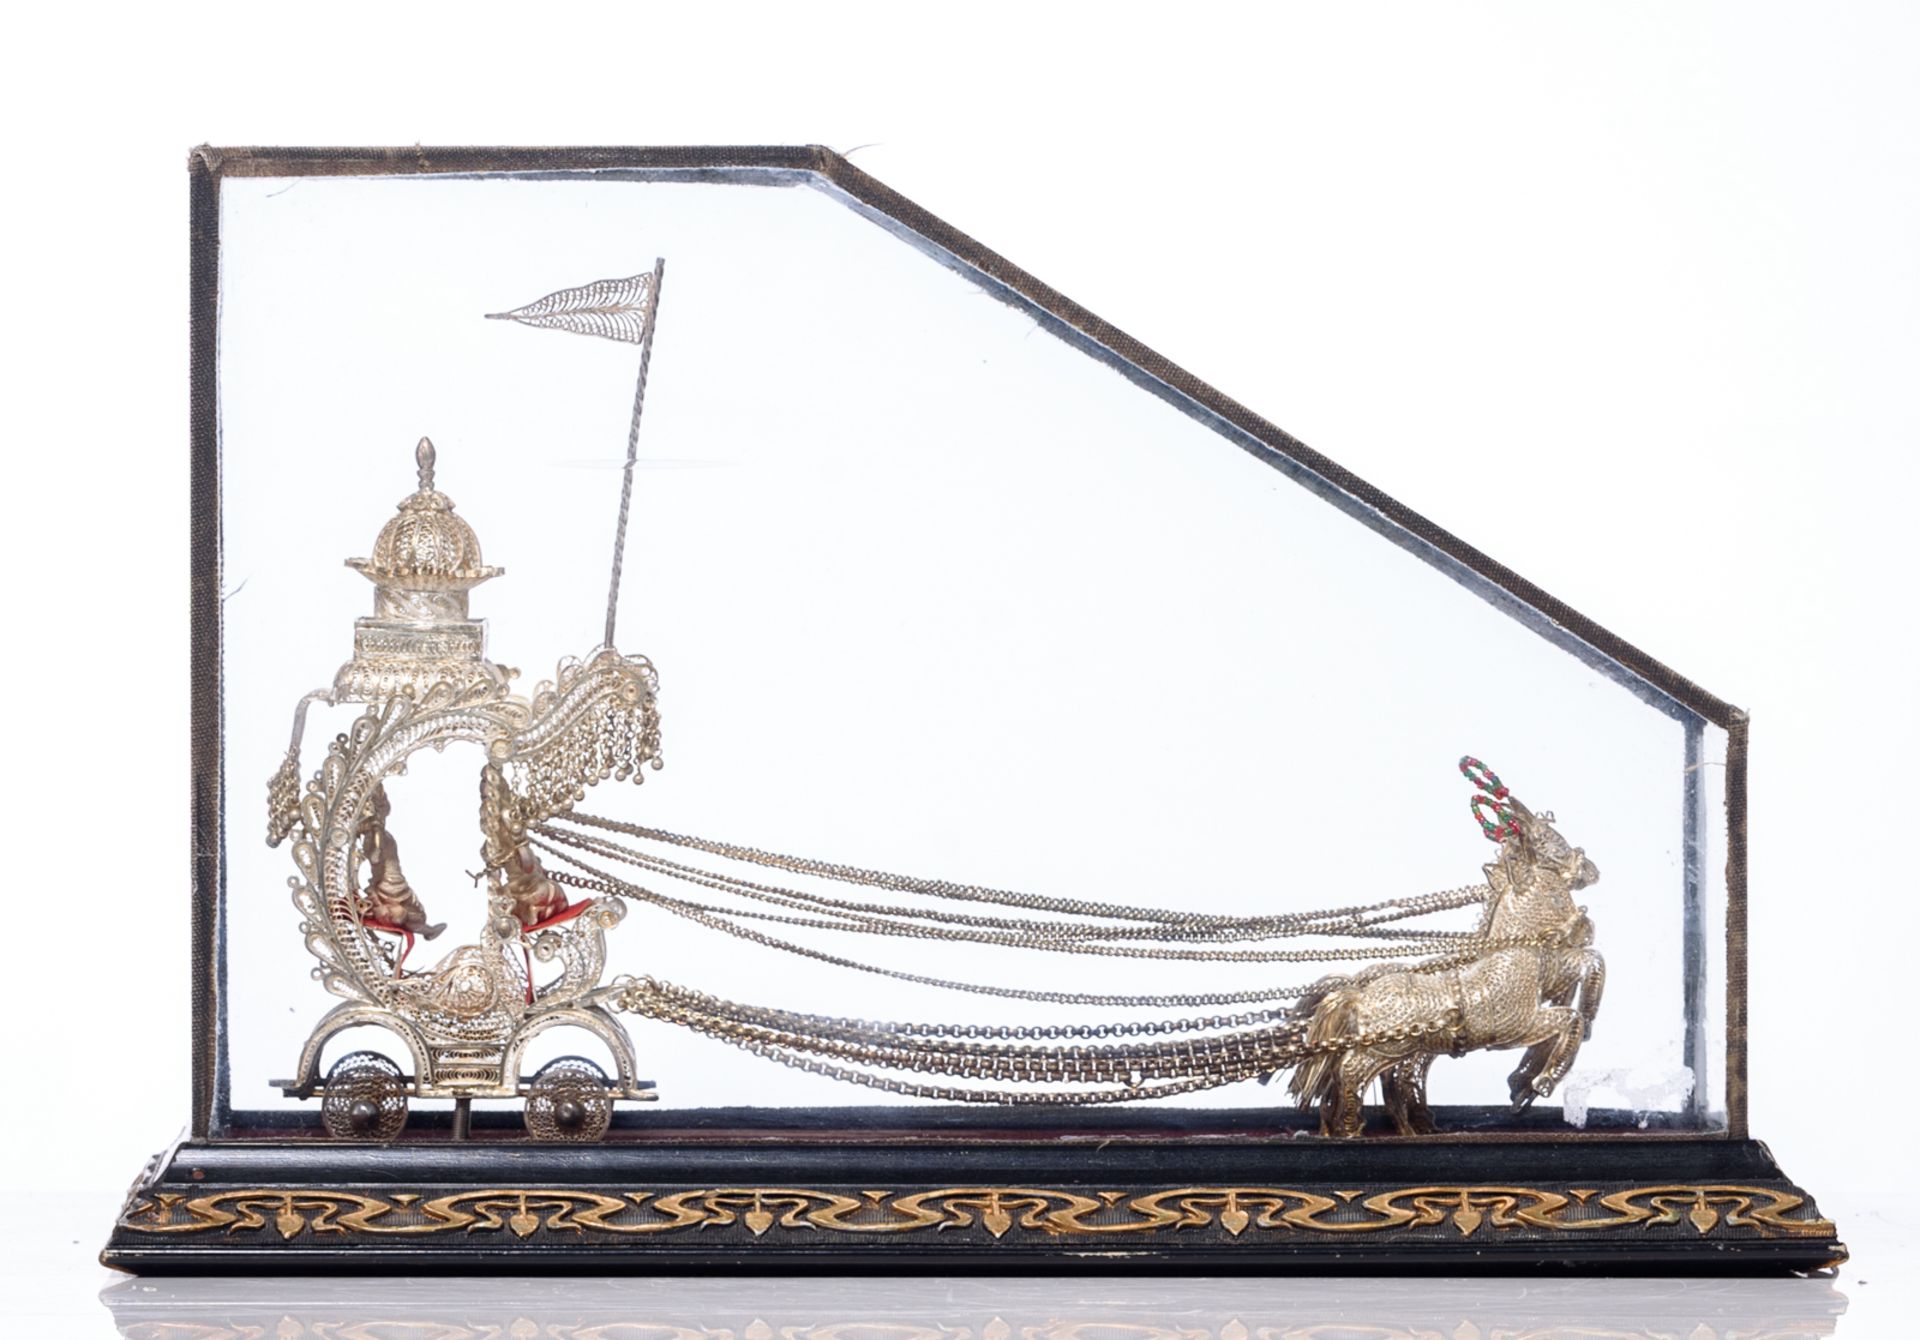 An Oriental silver filigree horse-drawn carriage, in a glass case with an Art Nouveau decorated base - Bild 4 aus 7